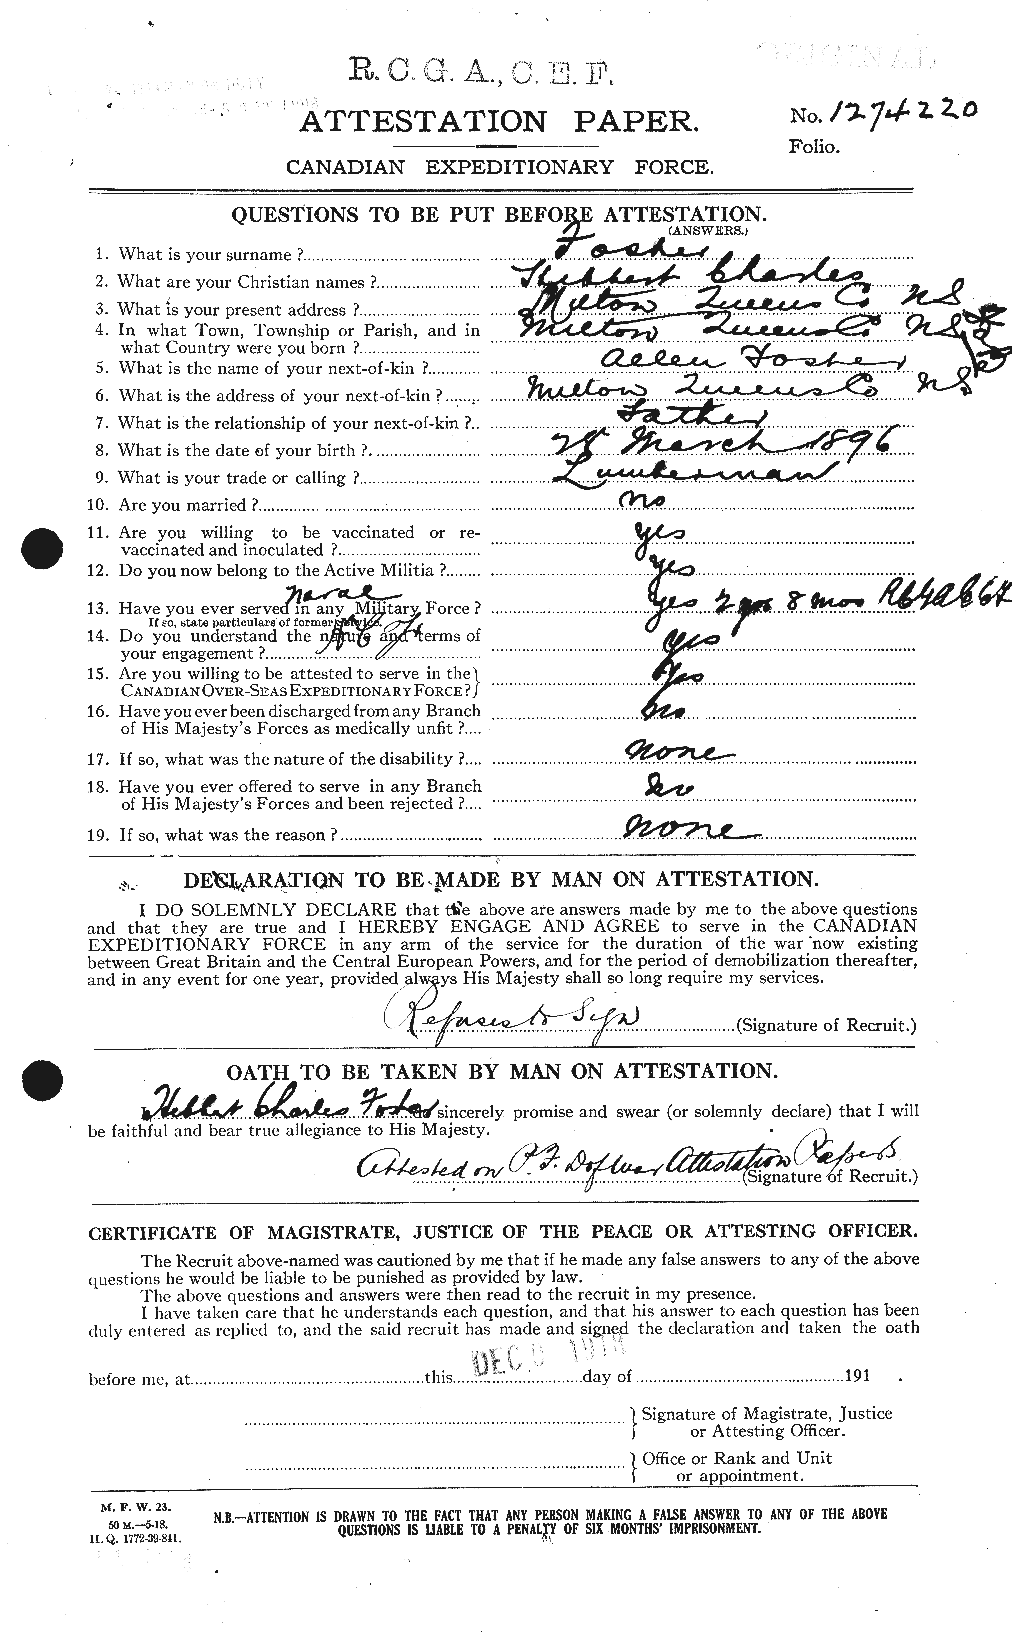 Personnel Records of the First World War - CEF 333256a